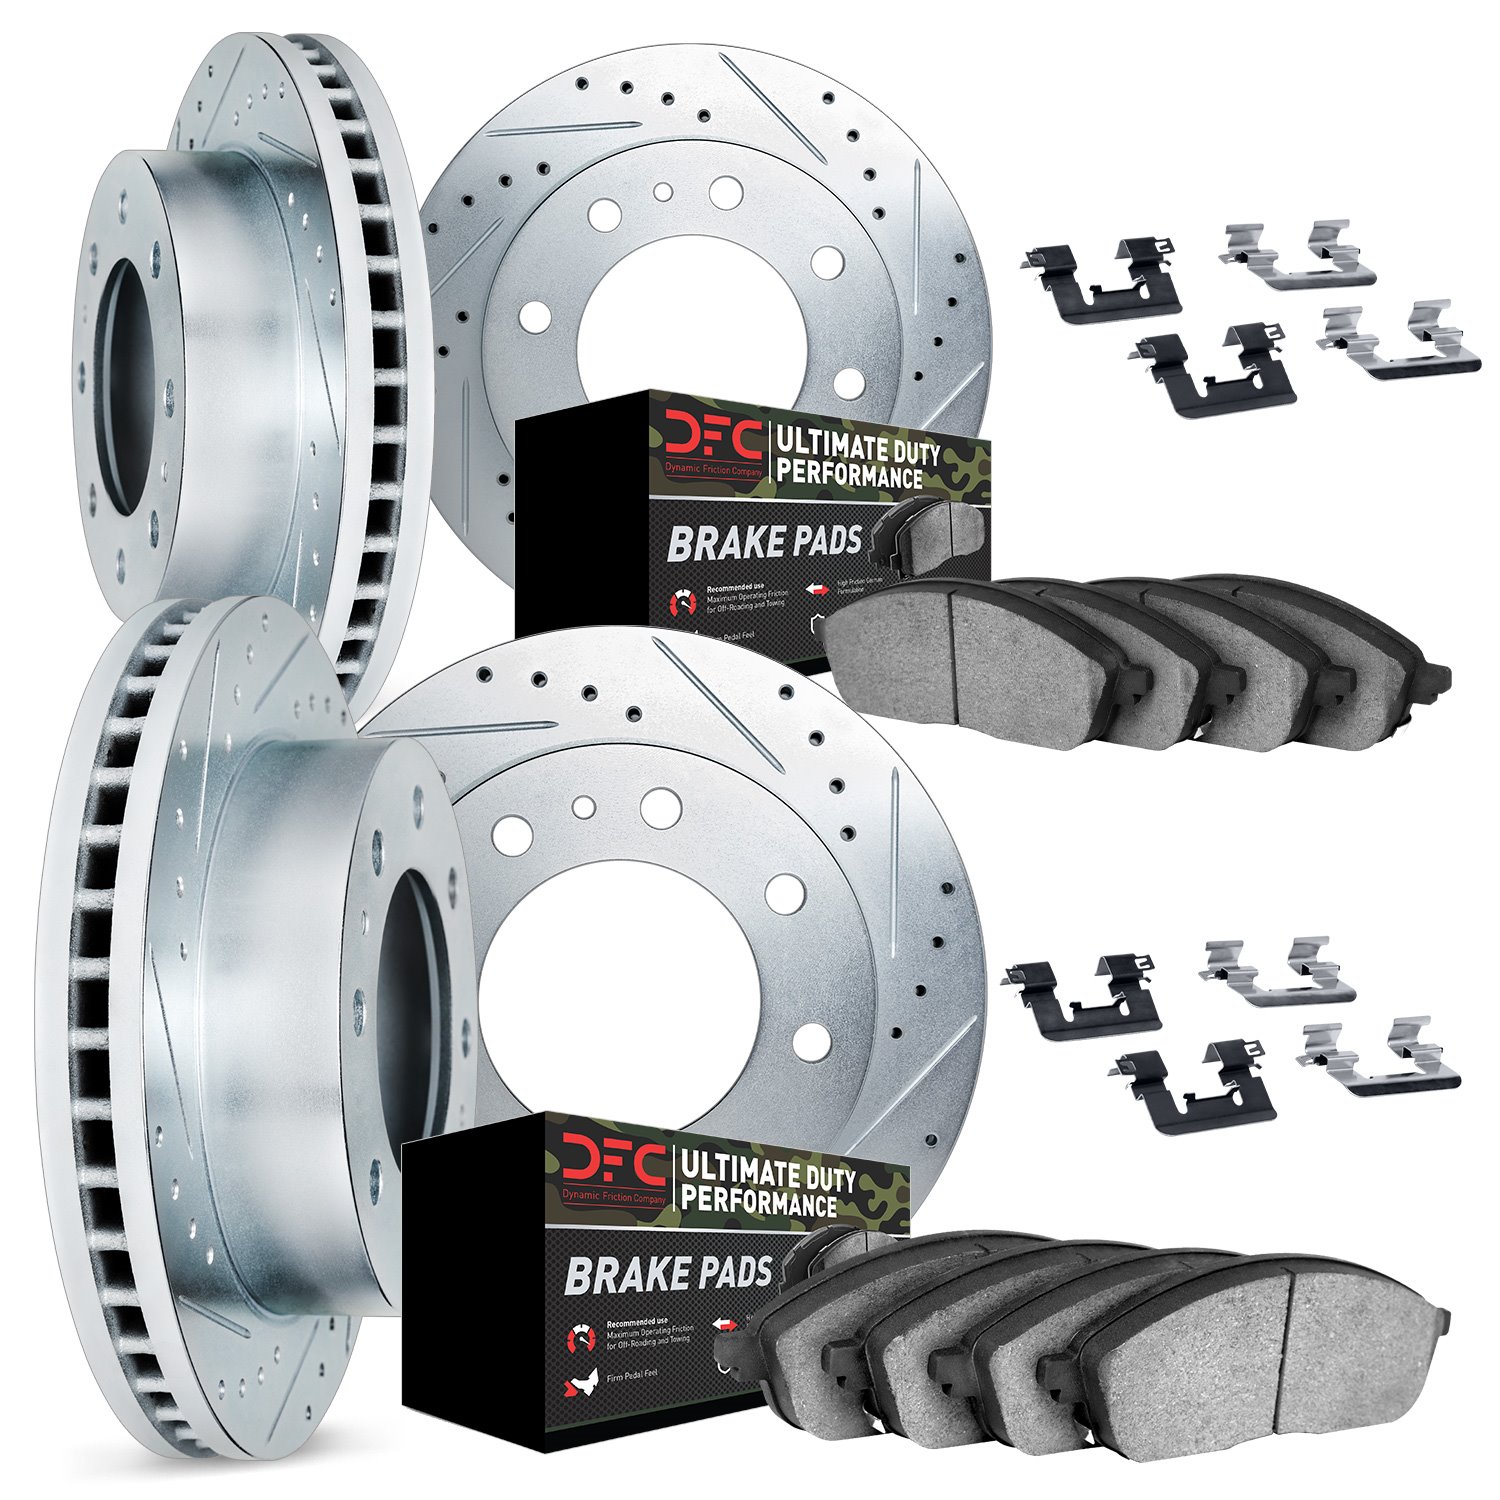 7414-54054 Drilled/Slotted Brake Rotors with Ultimate-Duty Brake Pads Kit & Hardware [Silver], Fits Select Ford/Lincoln/Mercury/